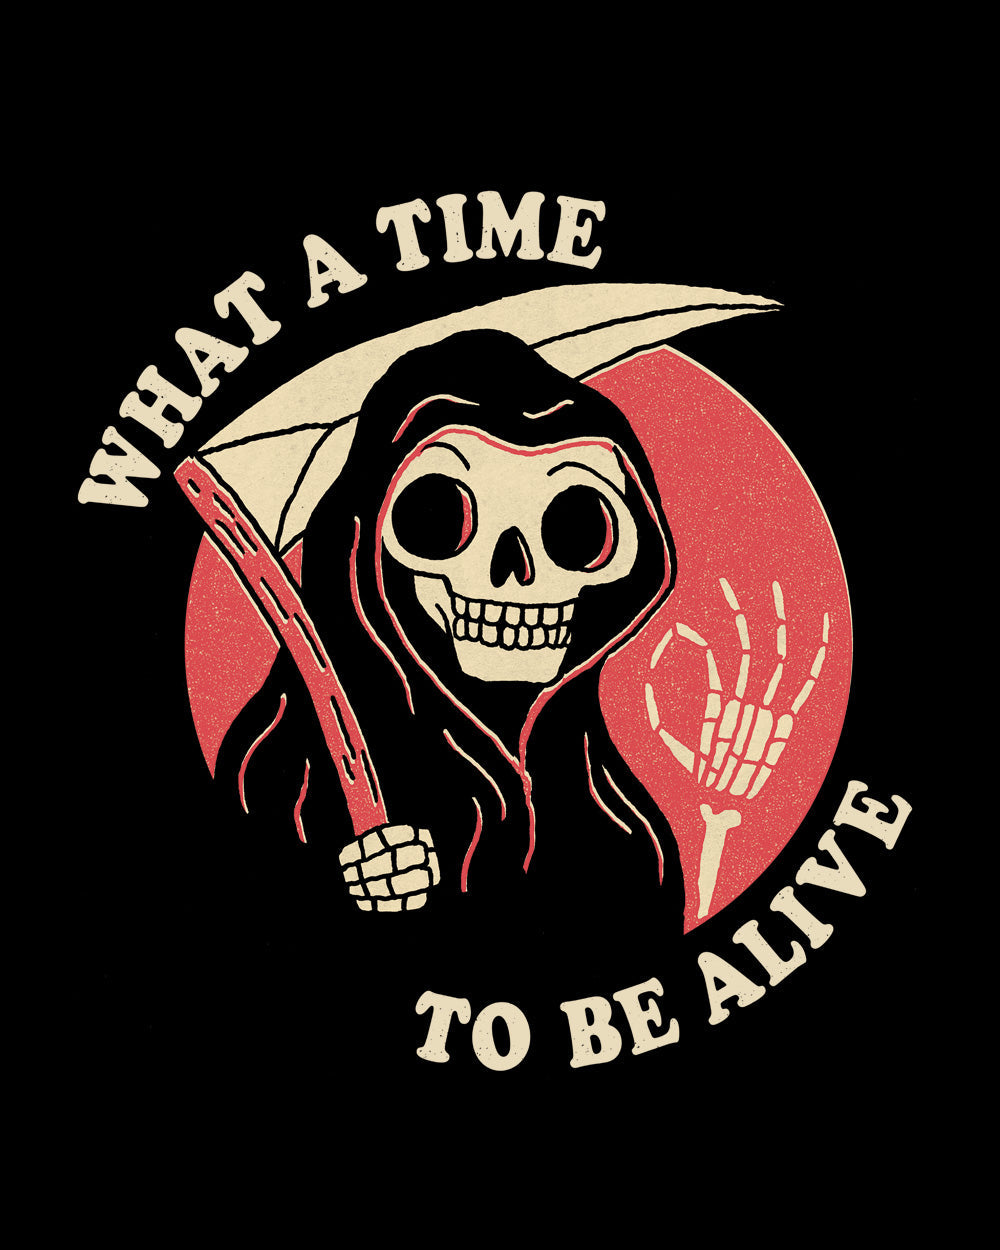 What A Time To Be Alive Funny Humorous Grim Reaper Social Commentary Slogan Cotton T-Shirt